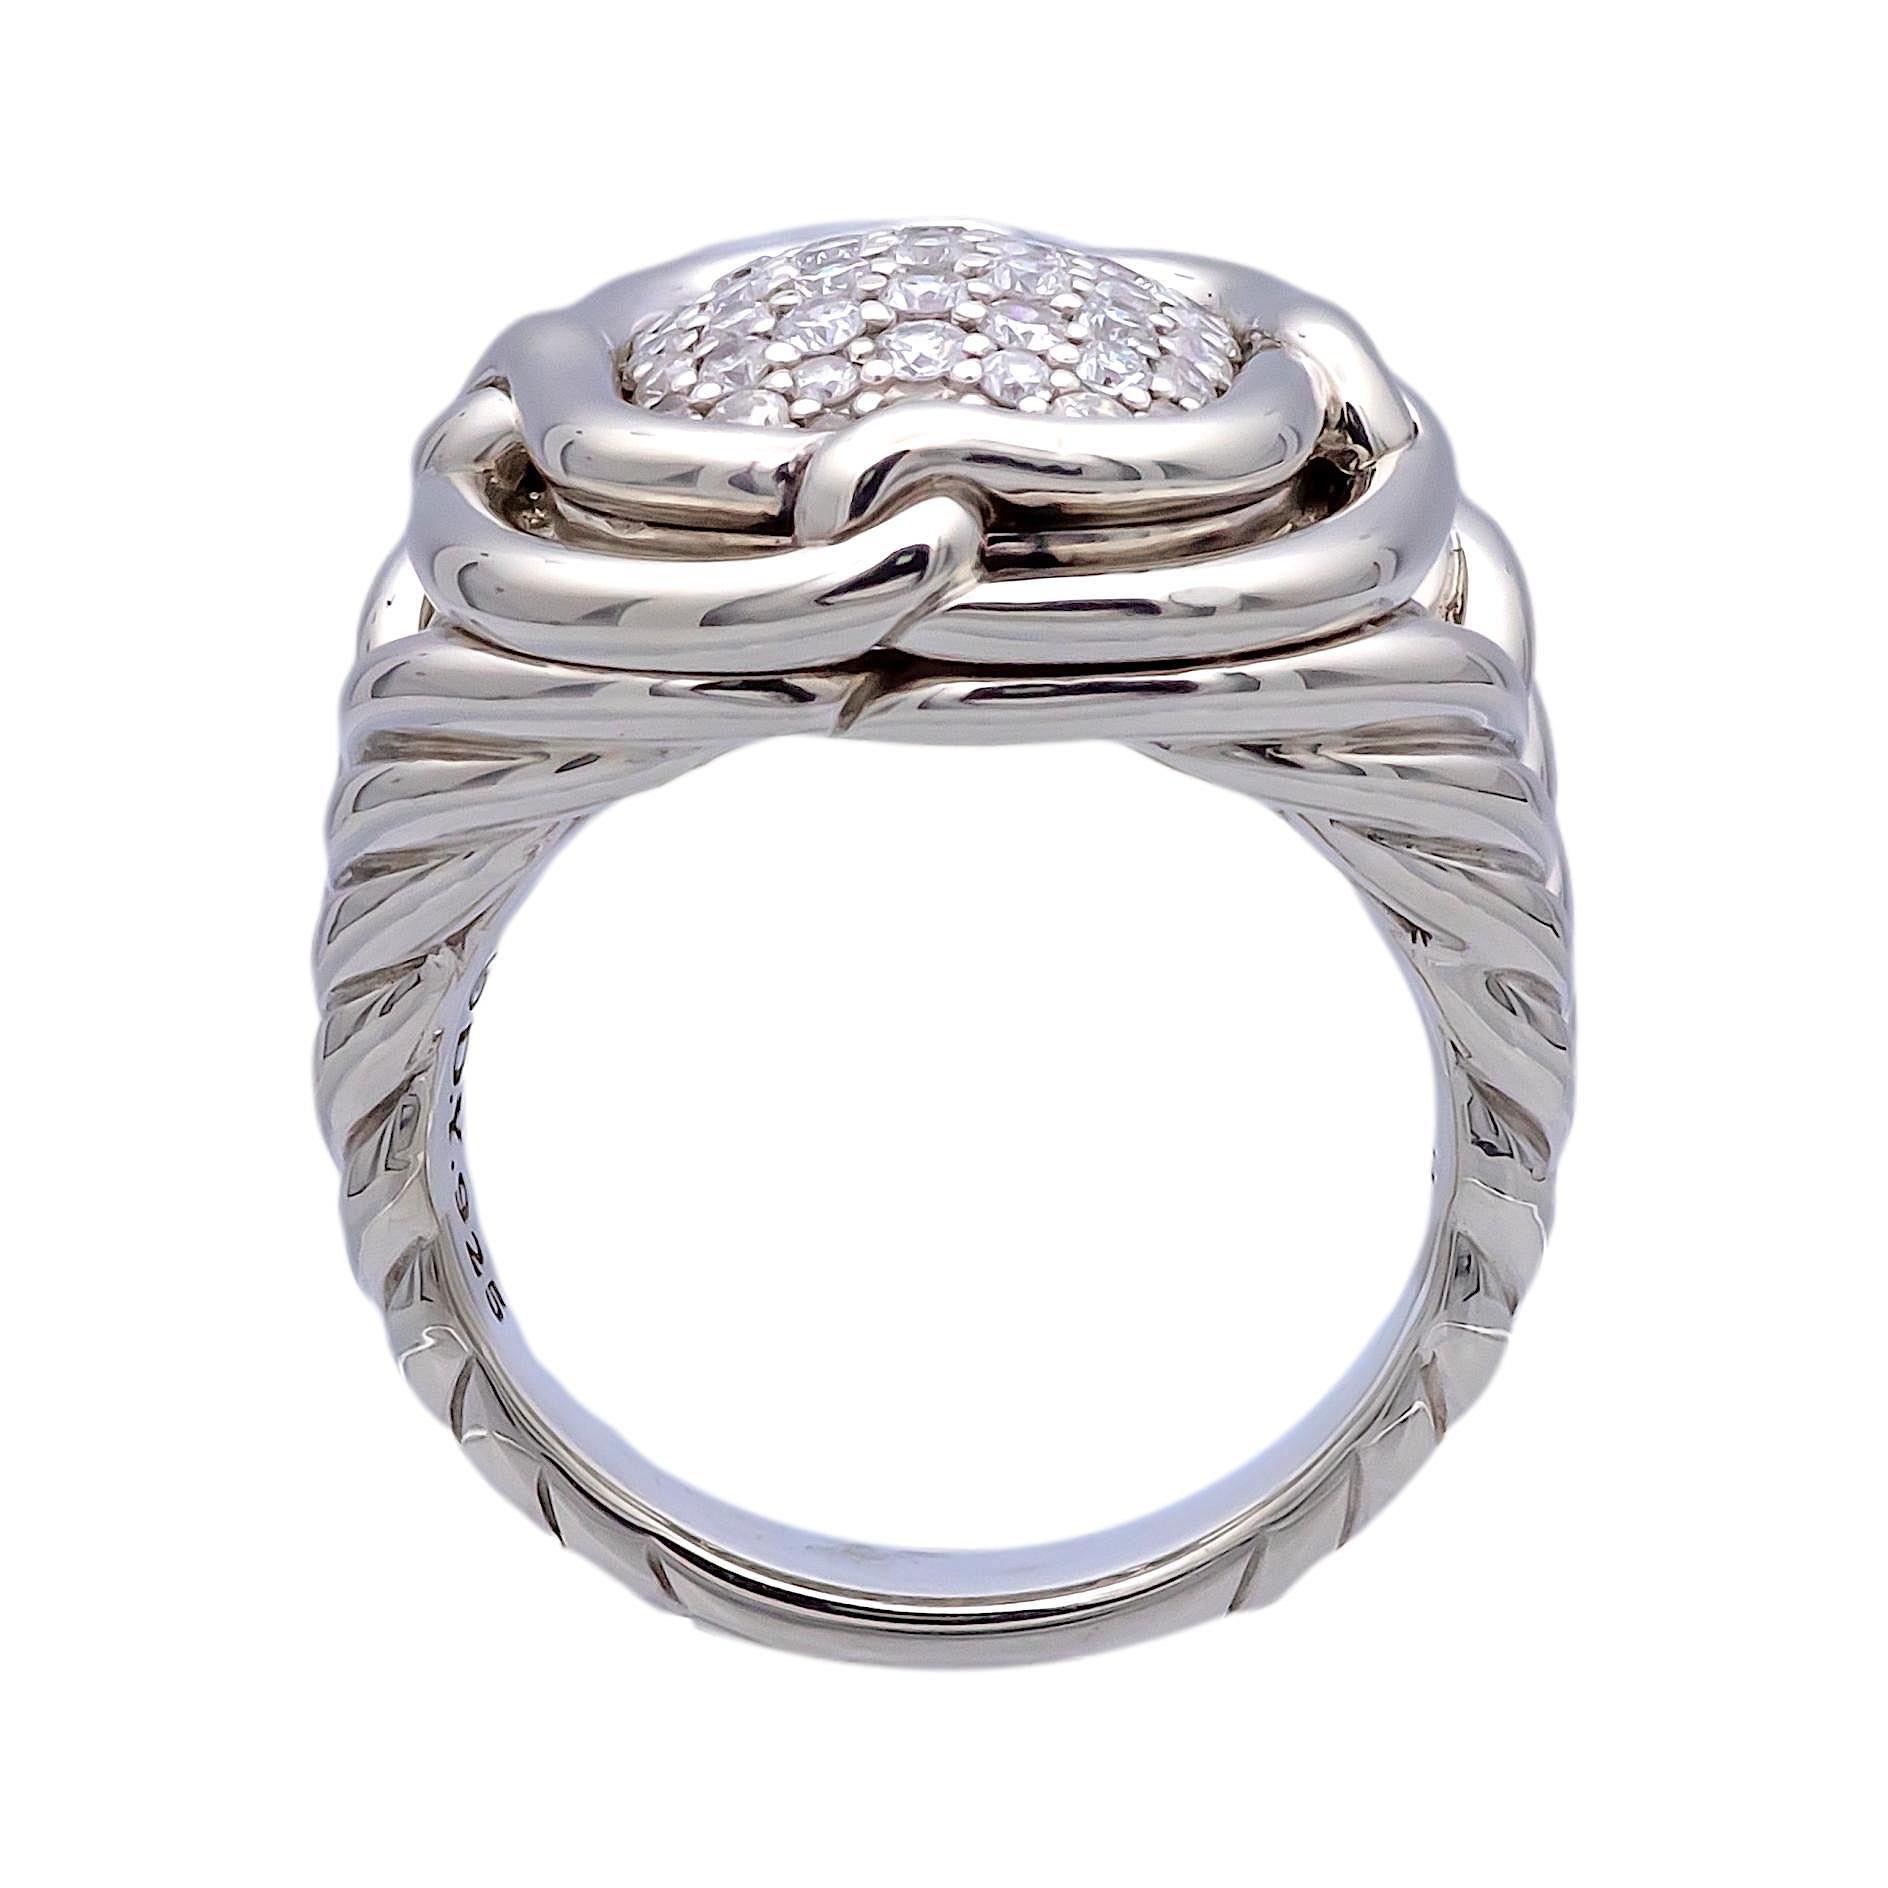 David Yurman Labyrinth Sterling Silver 1.00 Ct. Pave Diamond Ring In Good Condition For Sale In New York, NY